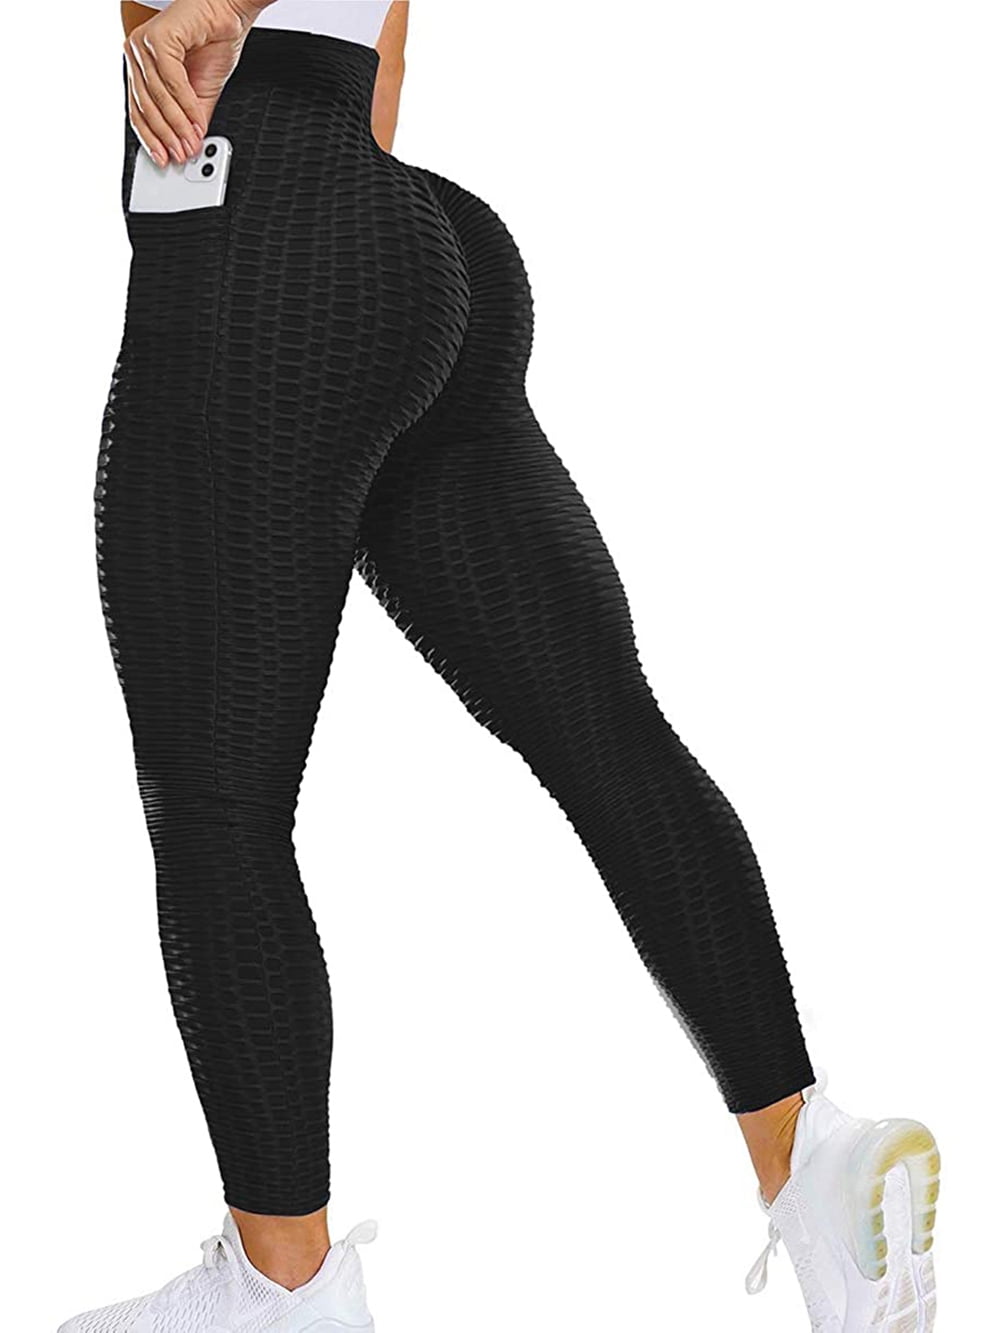 Sexy Ruched Butt Lift Legging Sport Women with Pockets Anti Cellulite Yoga  Pants Fitness Gym Sportswear Push Up Workout Tights - AliExpress